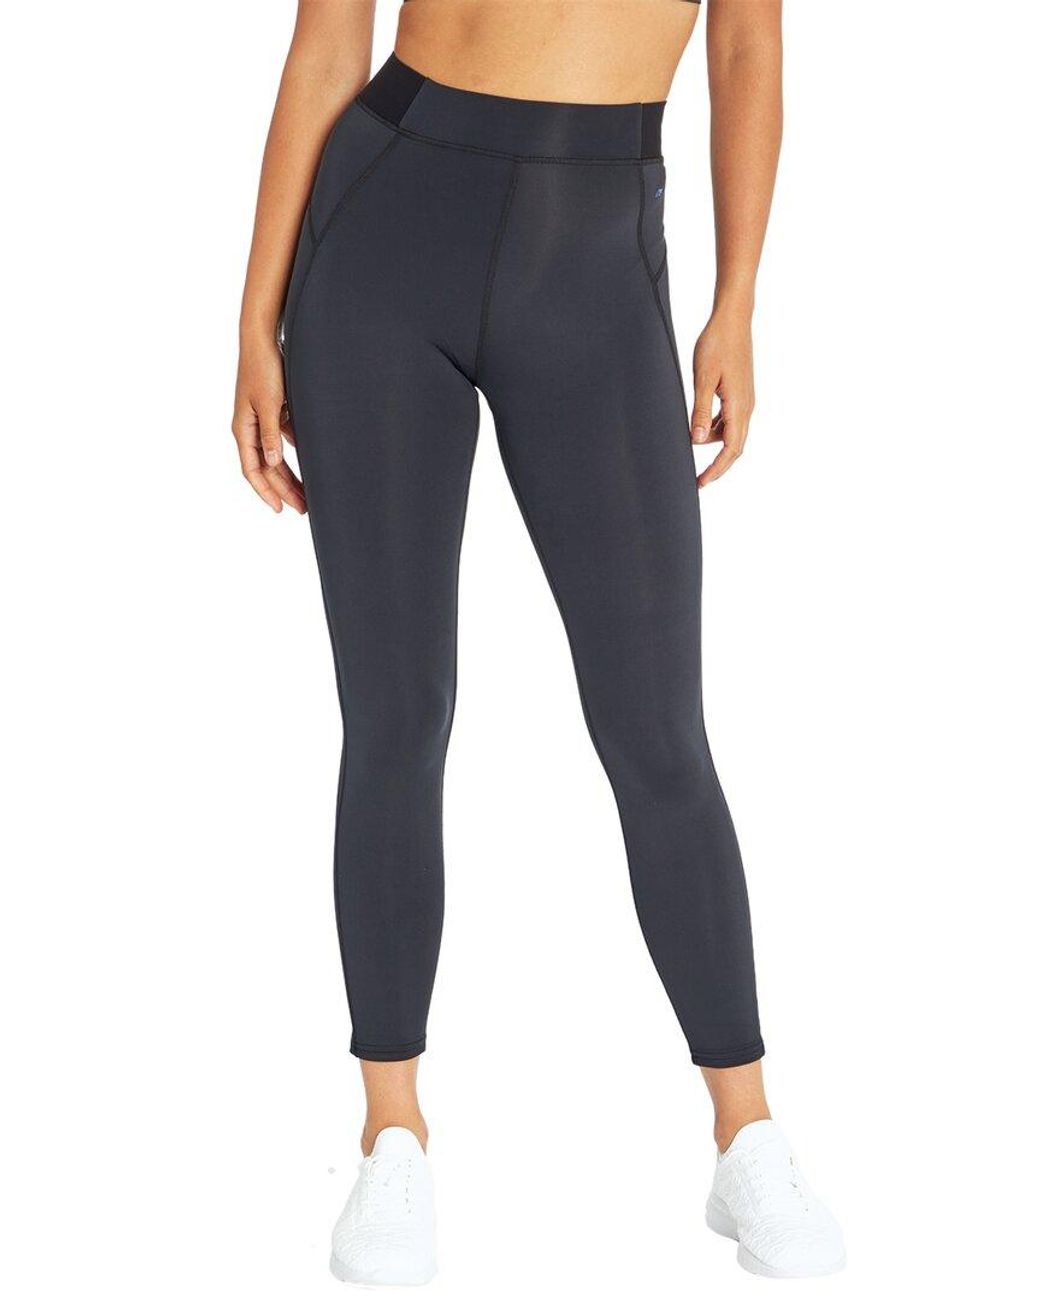 CYCLE HOUSE BY MARIKA Chaser Tight Legging in Blue | Lyst